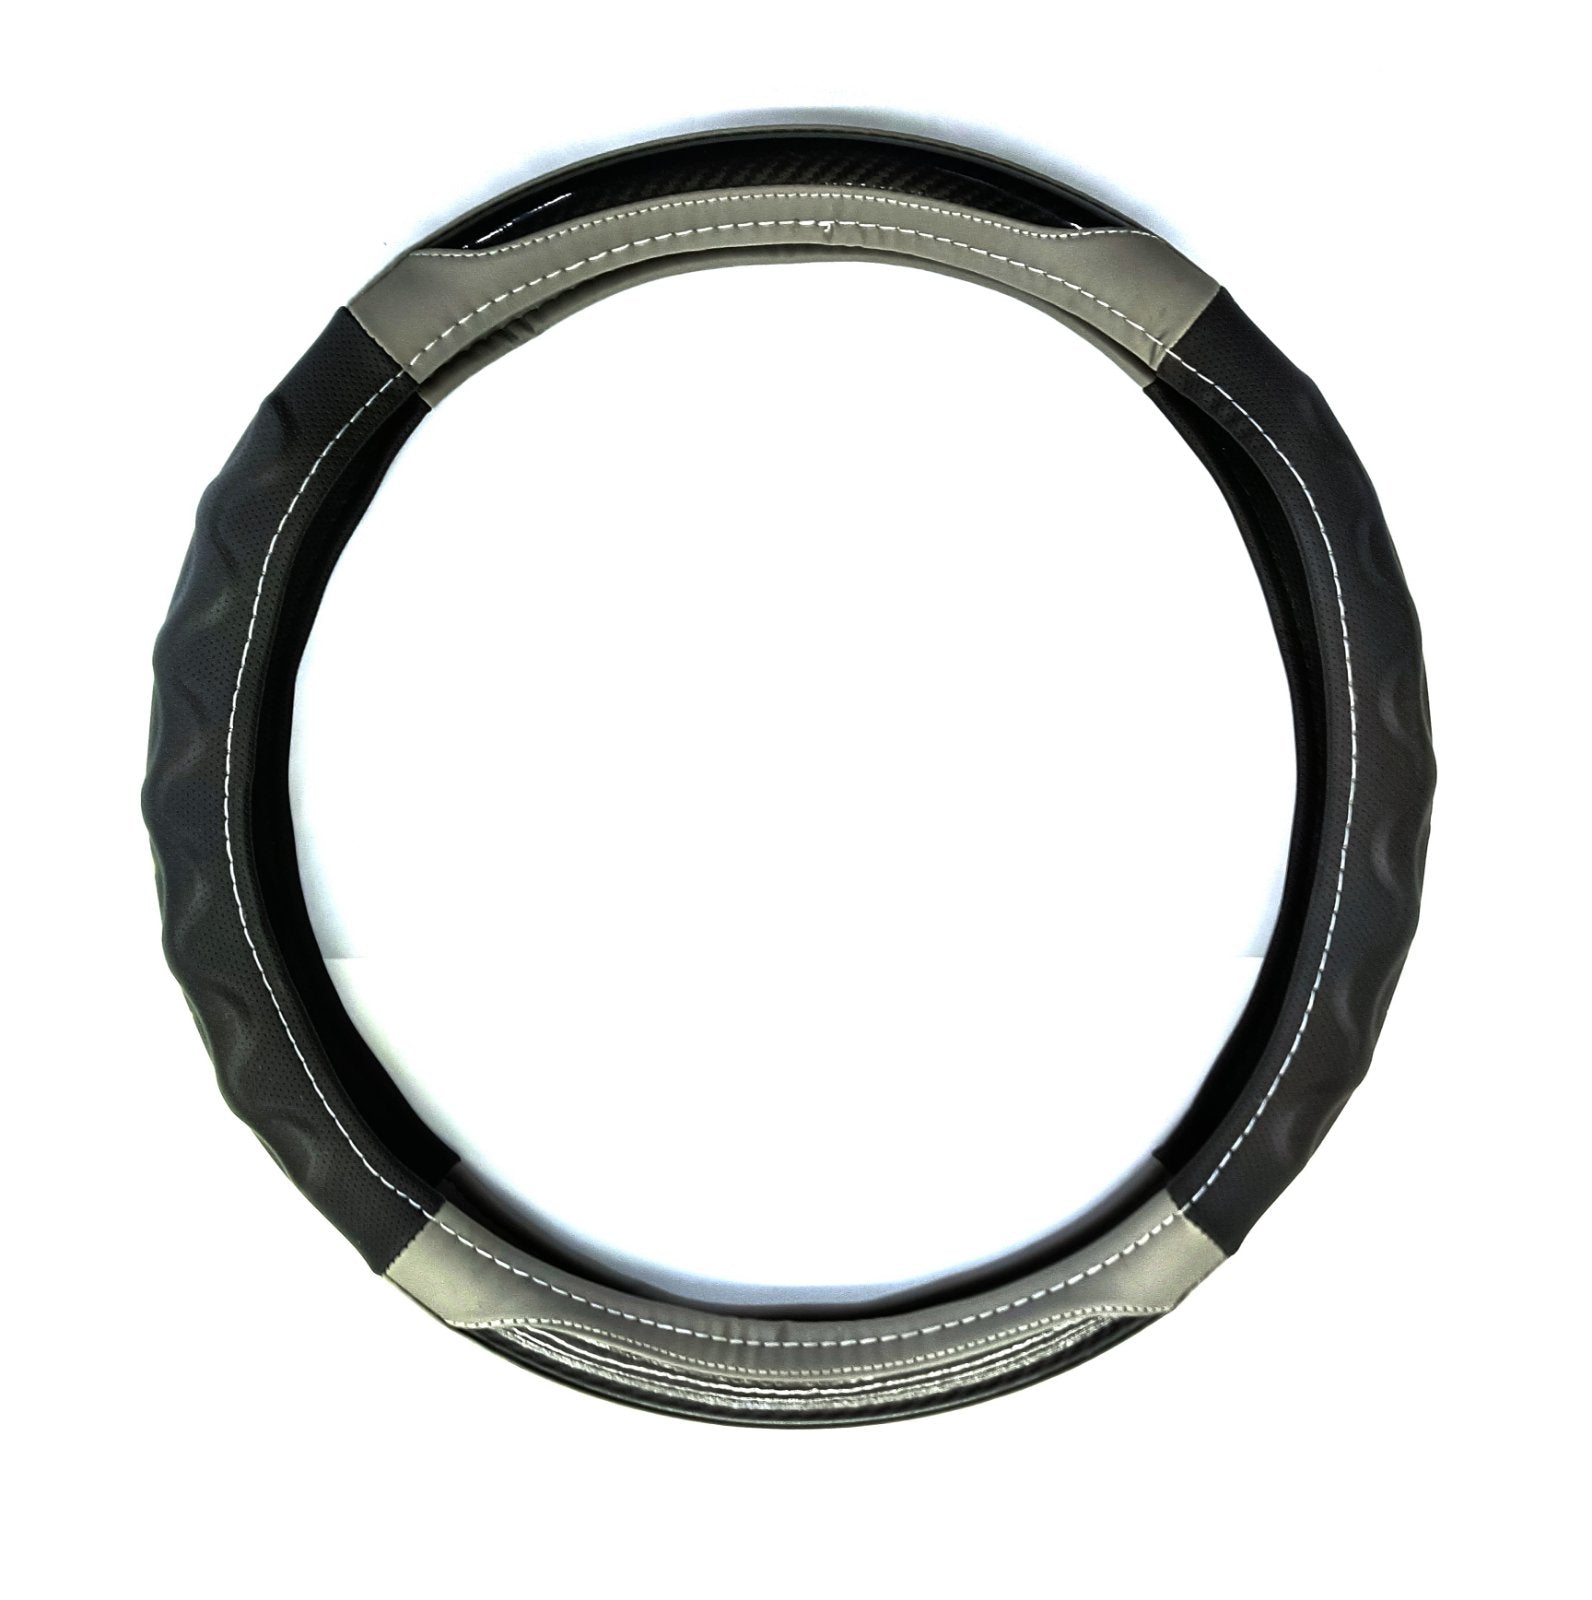 STEERING COVER CIRCLE (T)